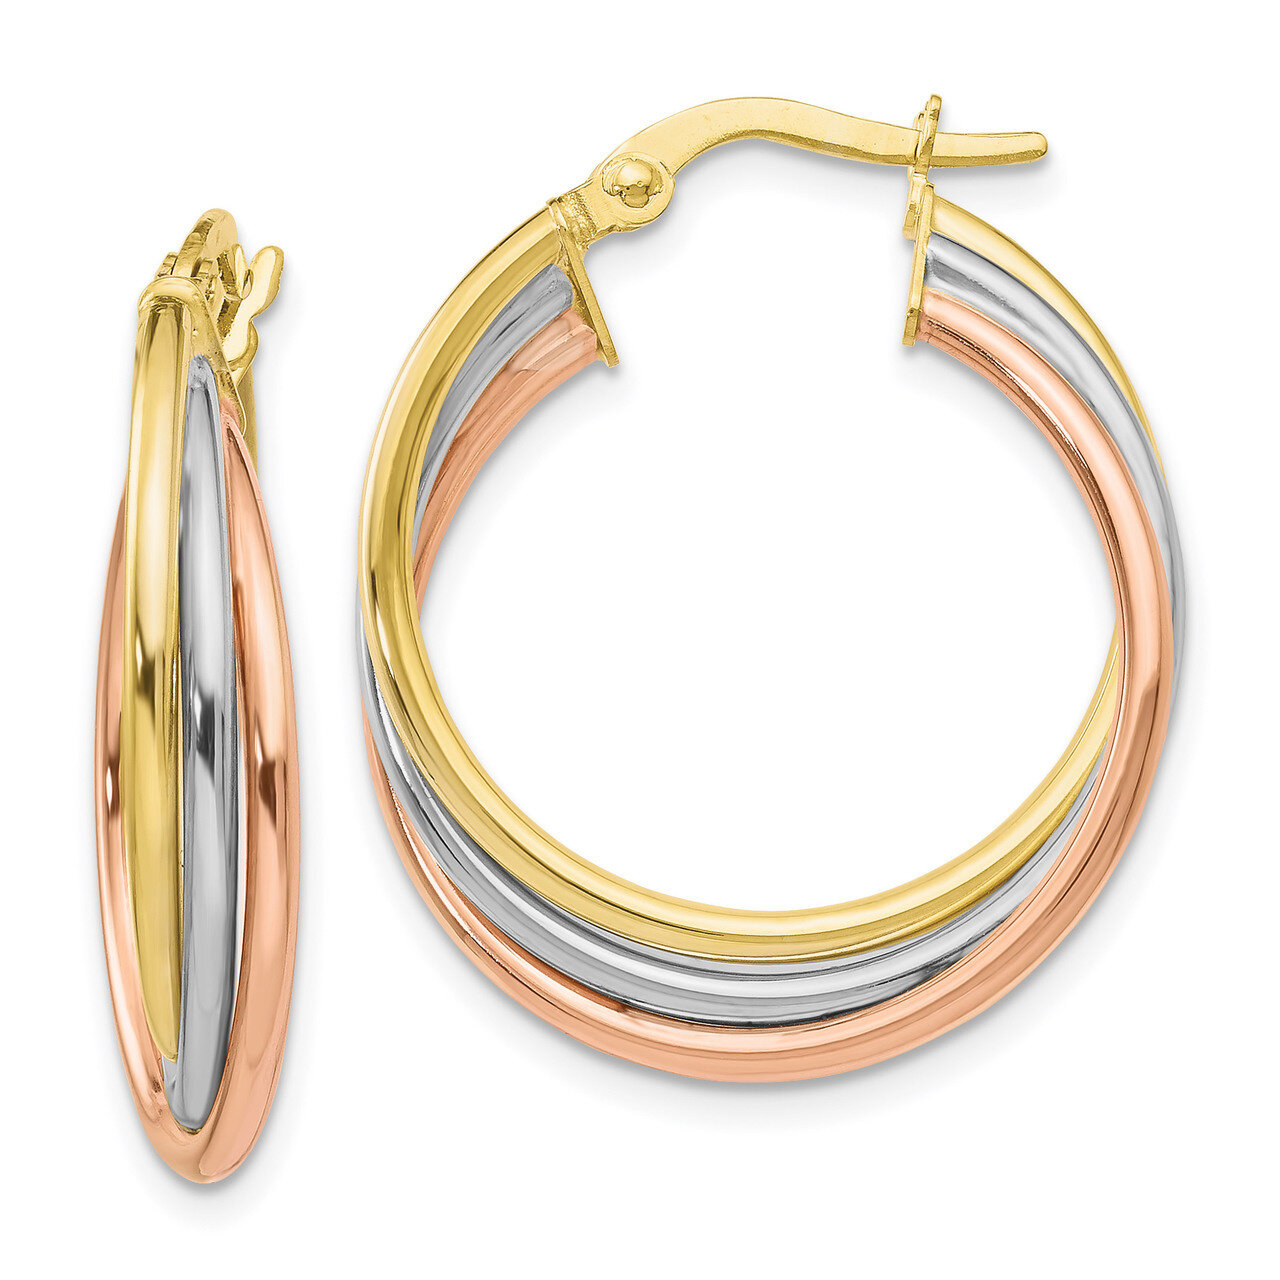 Polished and Textured Twisted Hoop Earrings 10k Tri-color Gold HB-10LE441